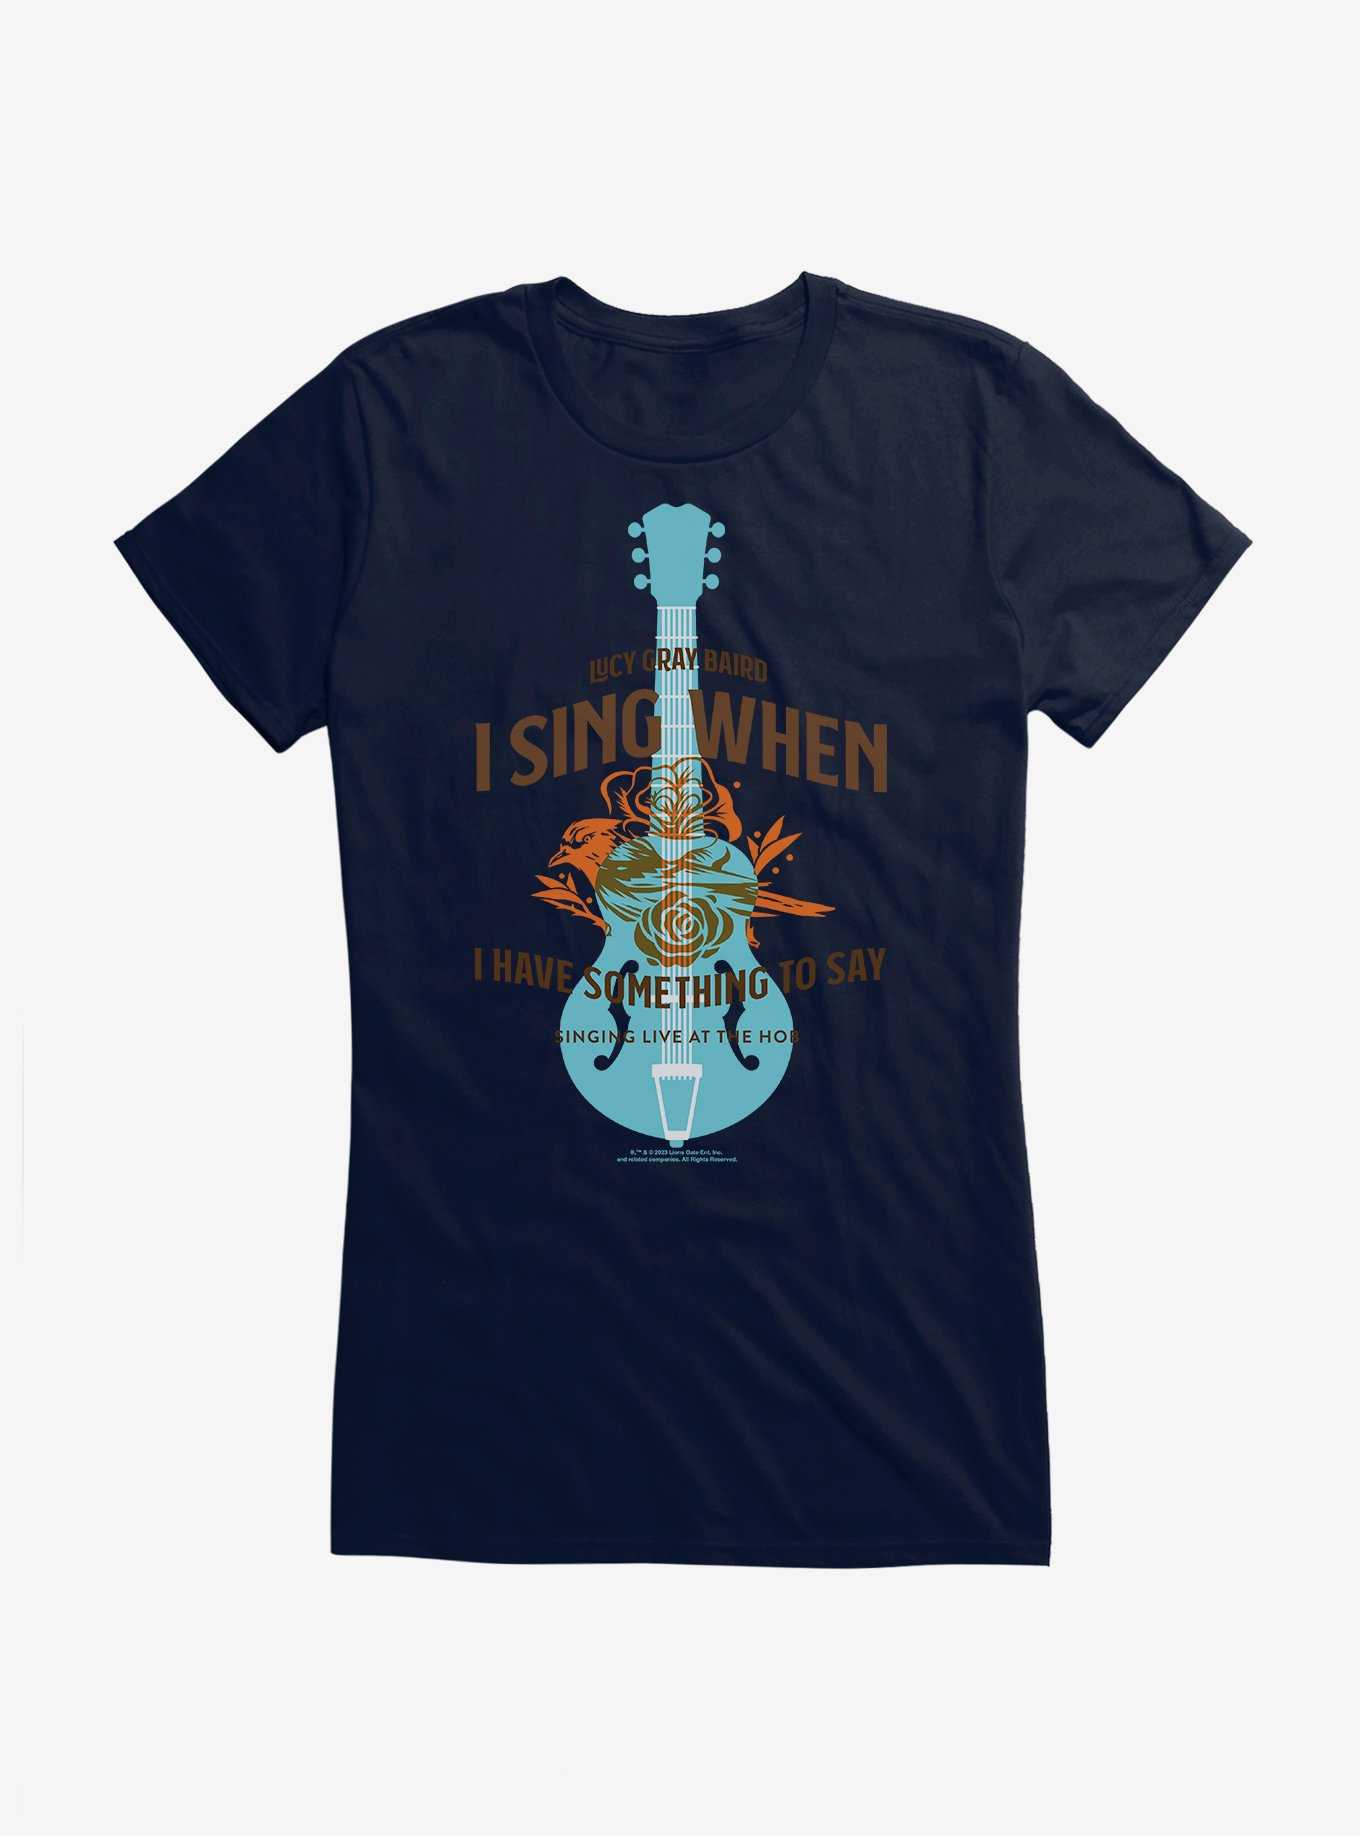 Hunger Games: The Ballad Of Songbirds And Snakes Lucy Gray Baird Guitar Girls T-Shirt, , hi-res